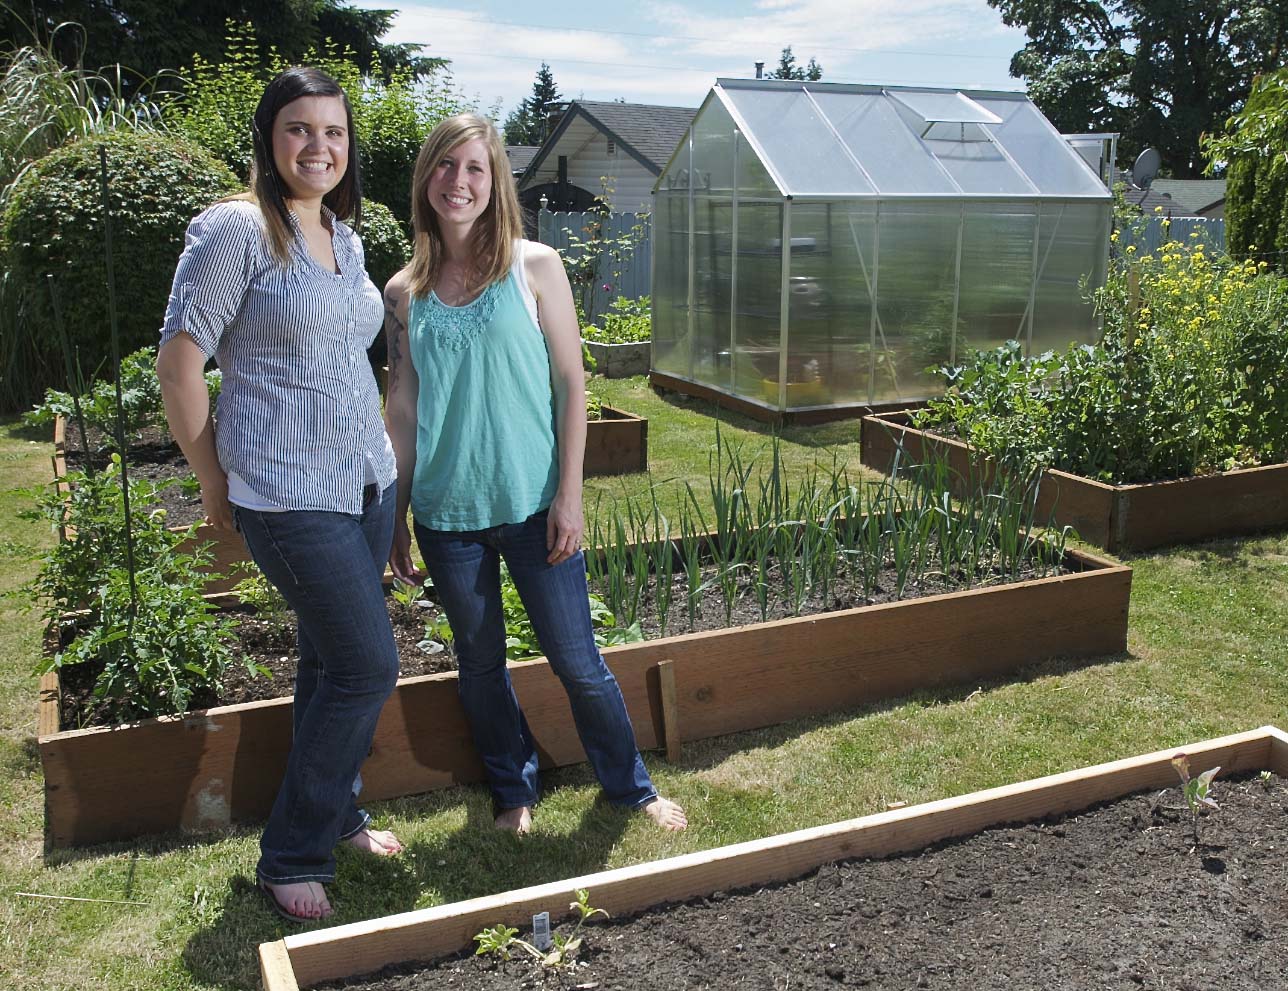 Omni Grover, right, and her best friend Kati Elliott stand next to Grover's urban garden, which includes a small greenhouse. The city cited Grover for the greenhouse because it's not in a backyard, but, with Elliott's help, she took the case to the Vancouver City Council and won. Consequently, rules regarding hobby greenhouses may be relaxed.